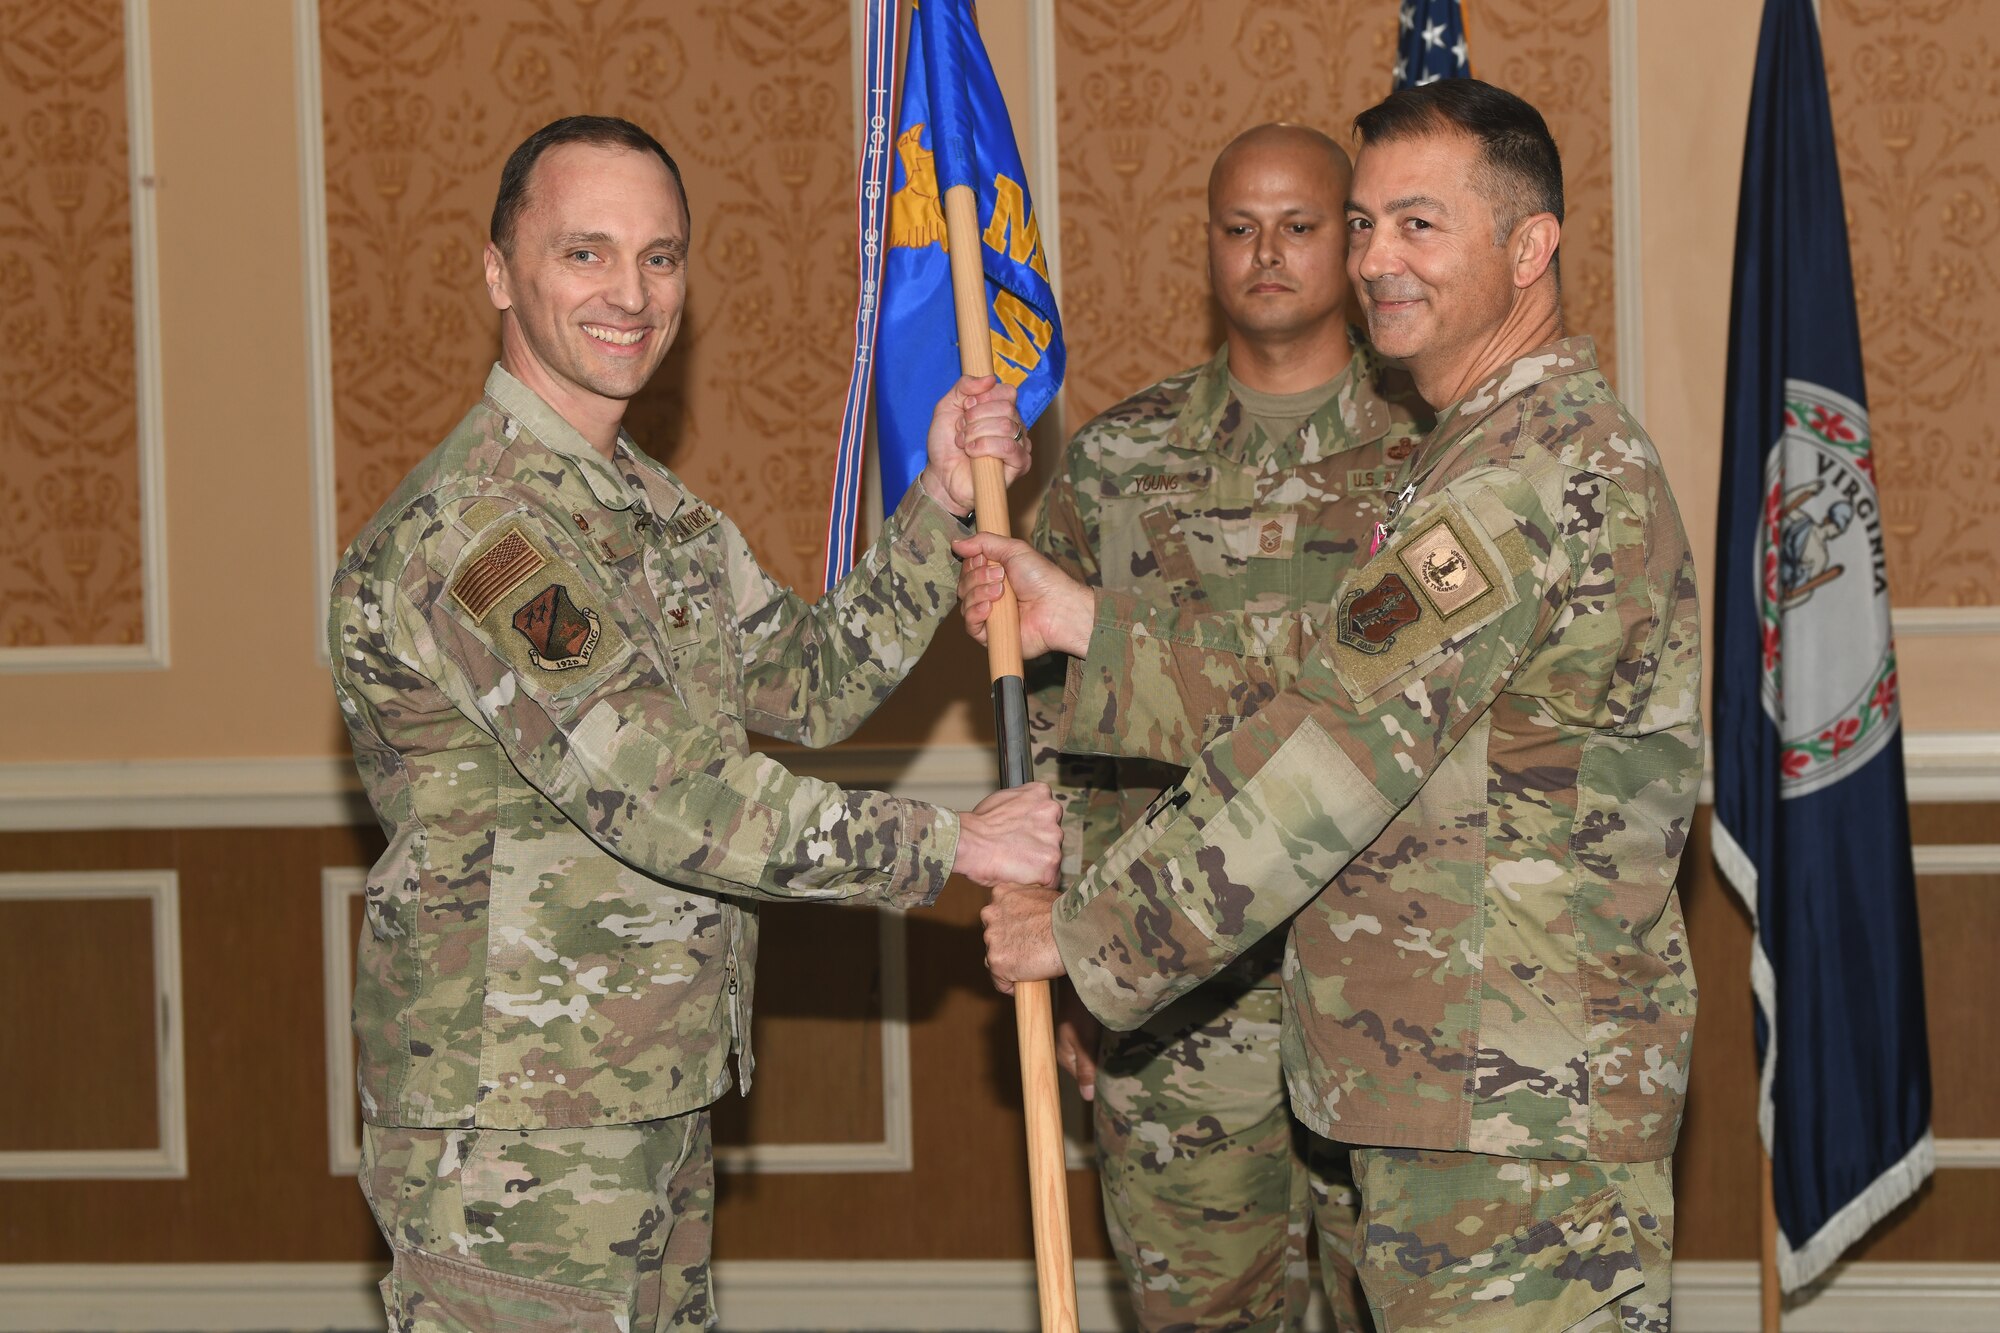 Two military members holding a guidon, smiling for photo.